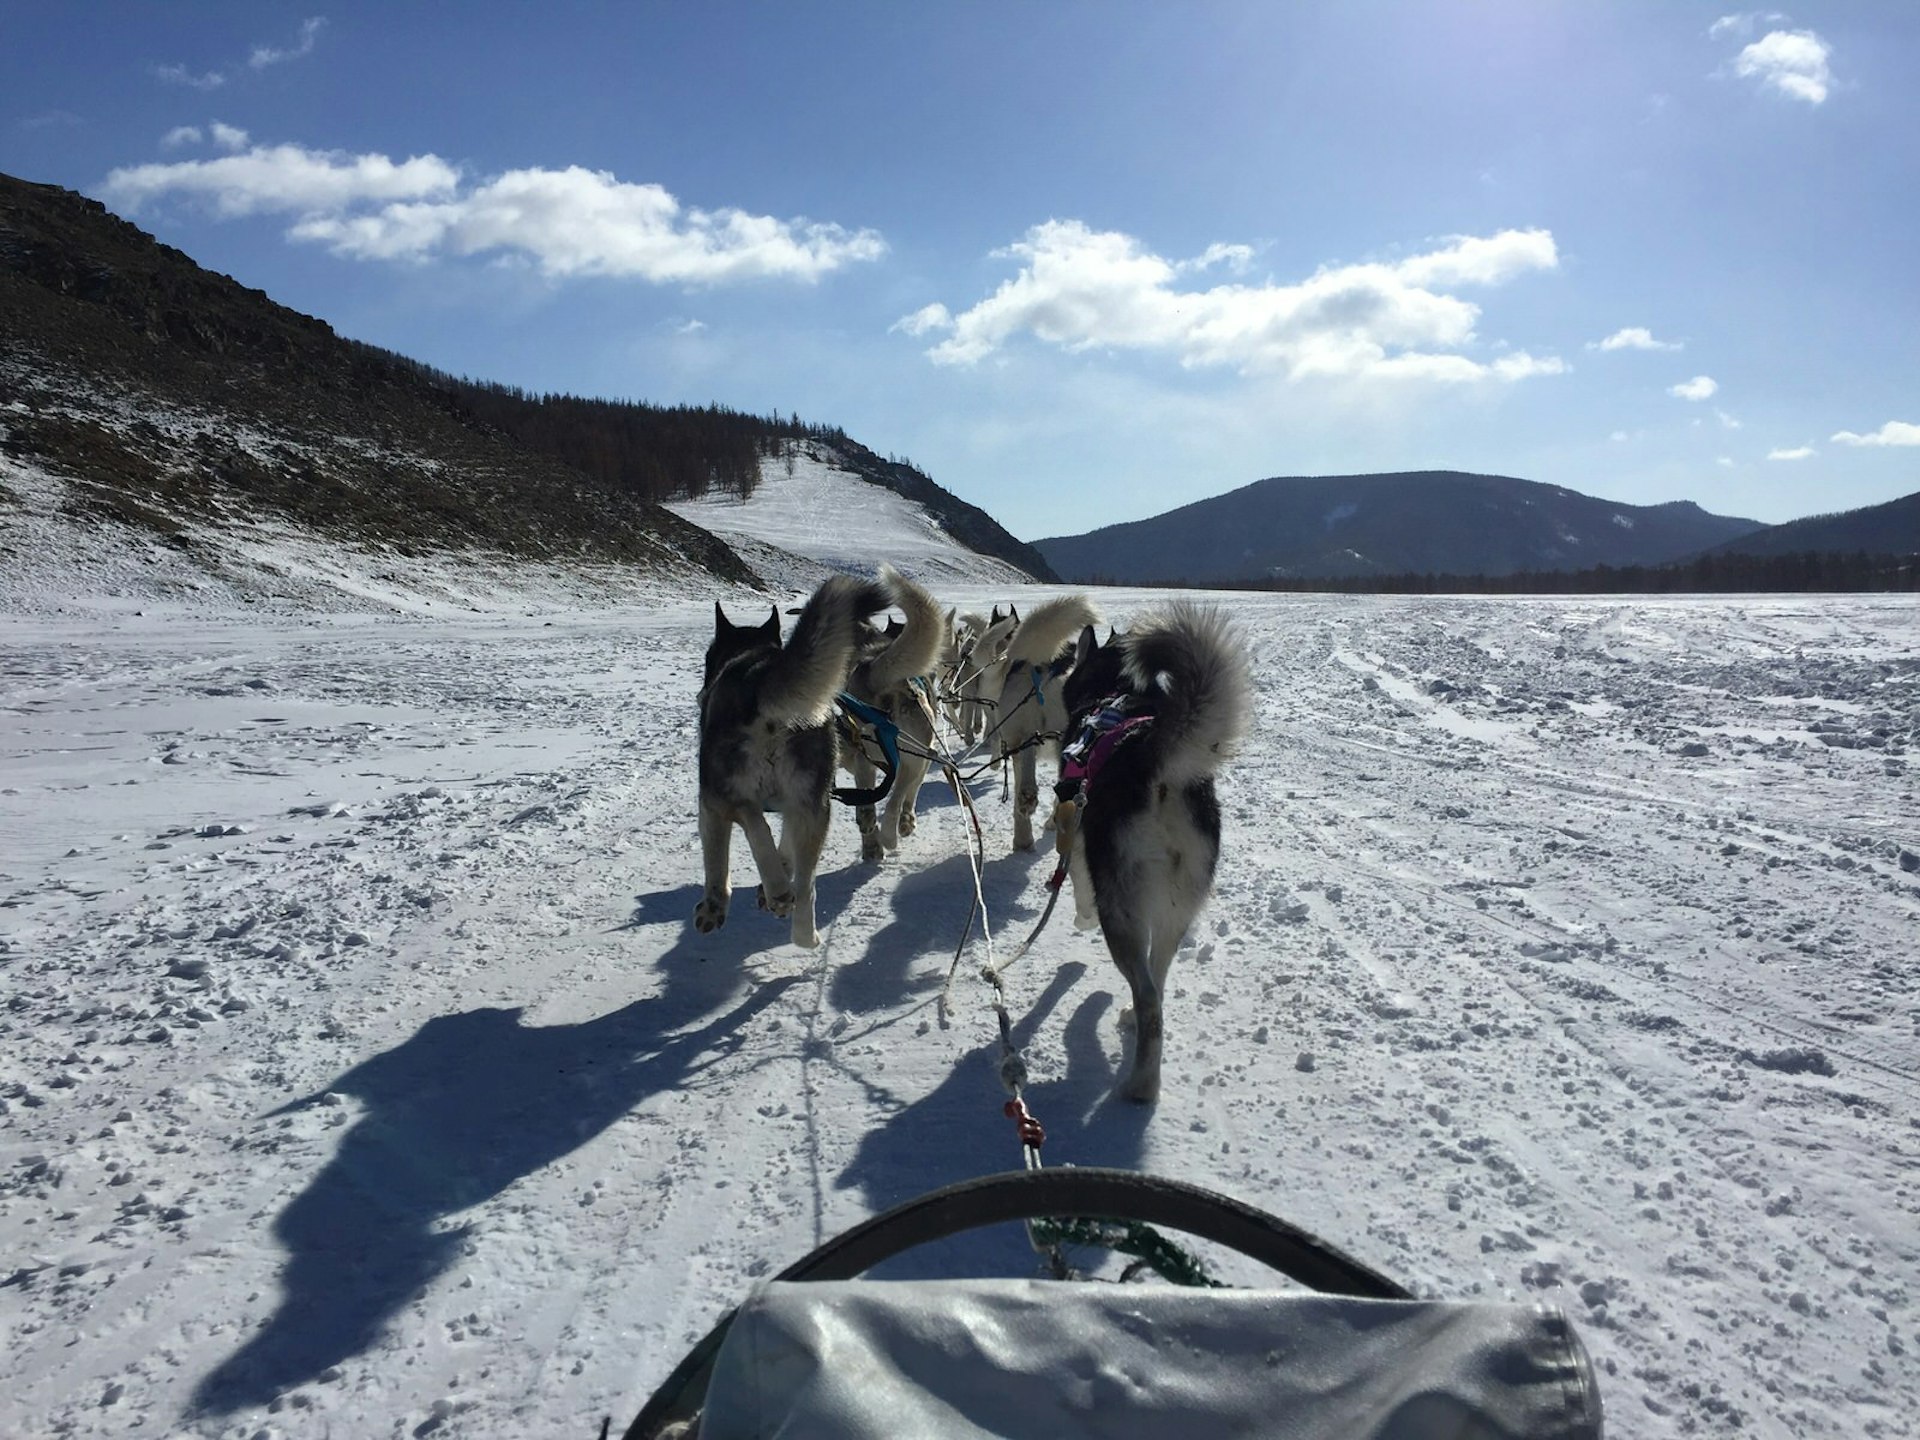 View of a team of sled dogs from the sled, traversing across a snowy countryside with blue skies